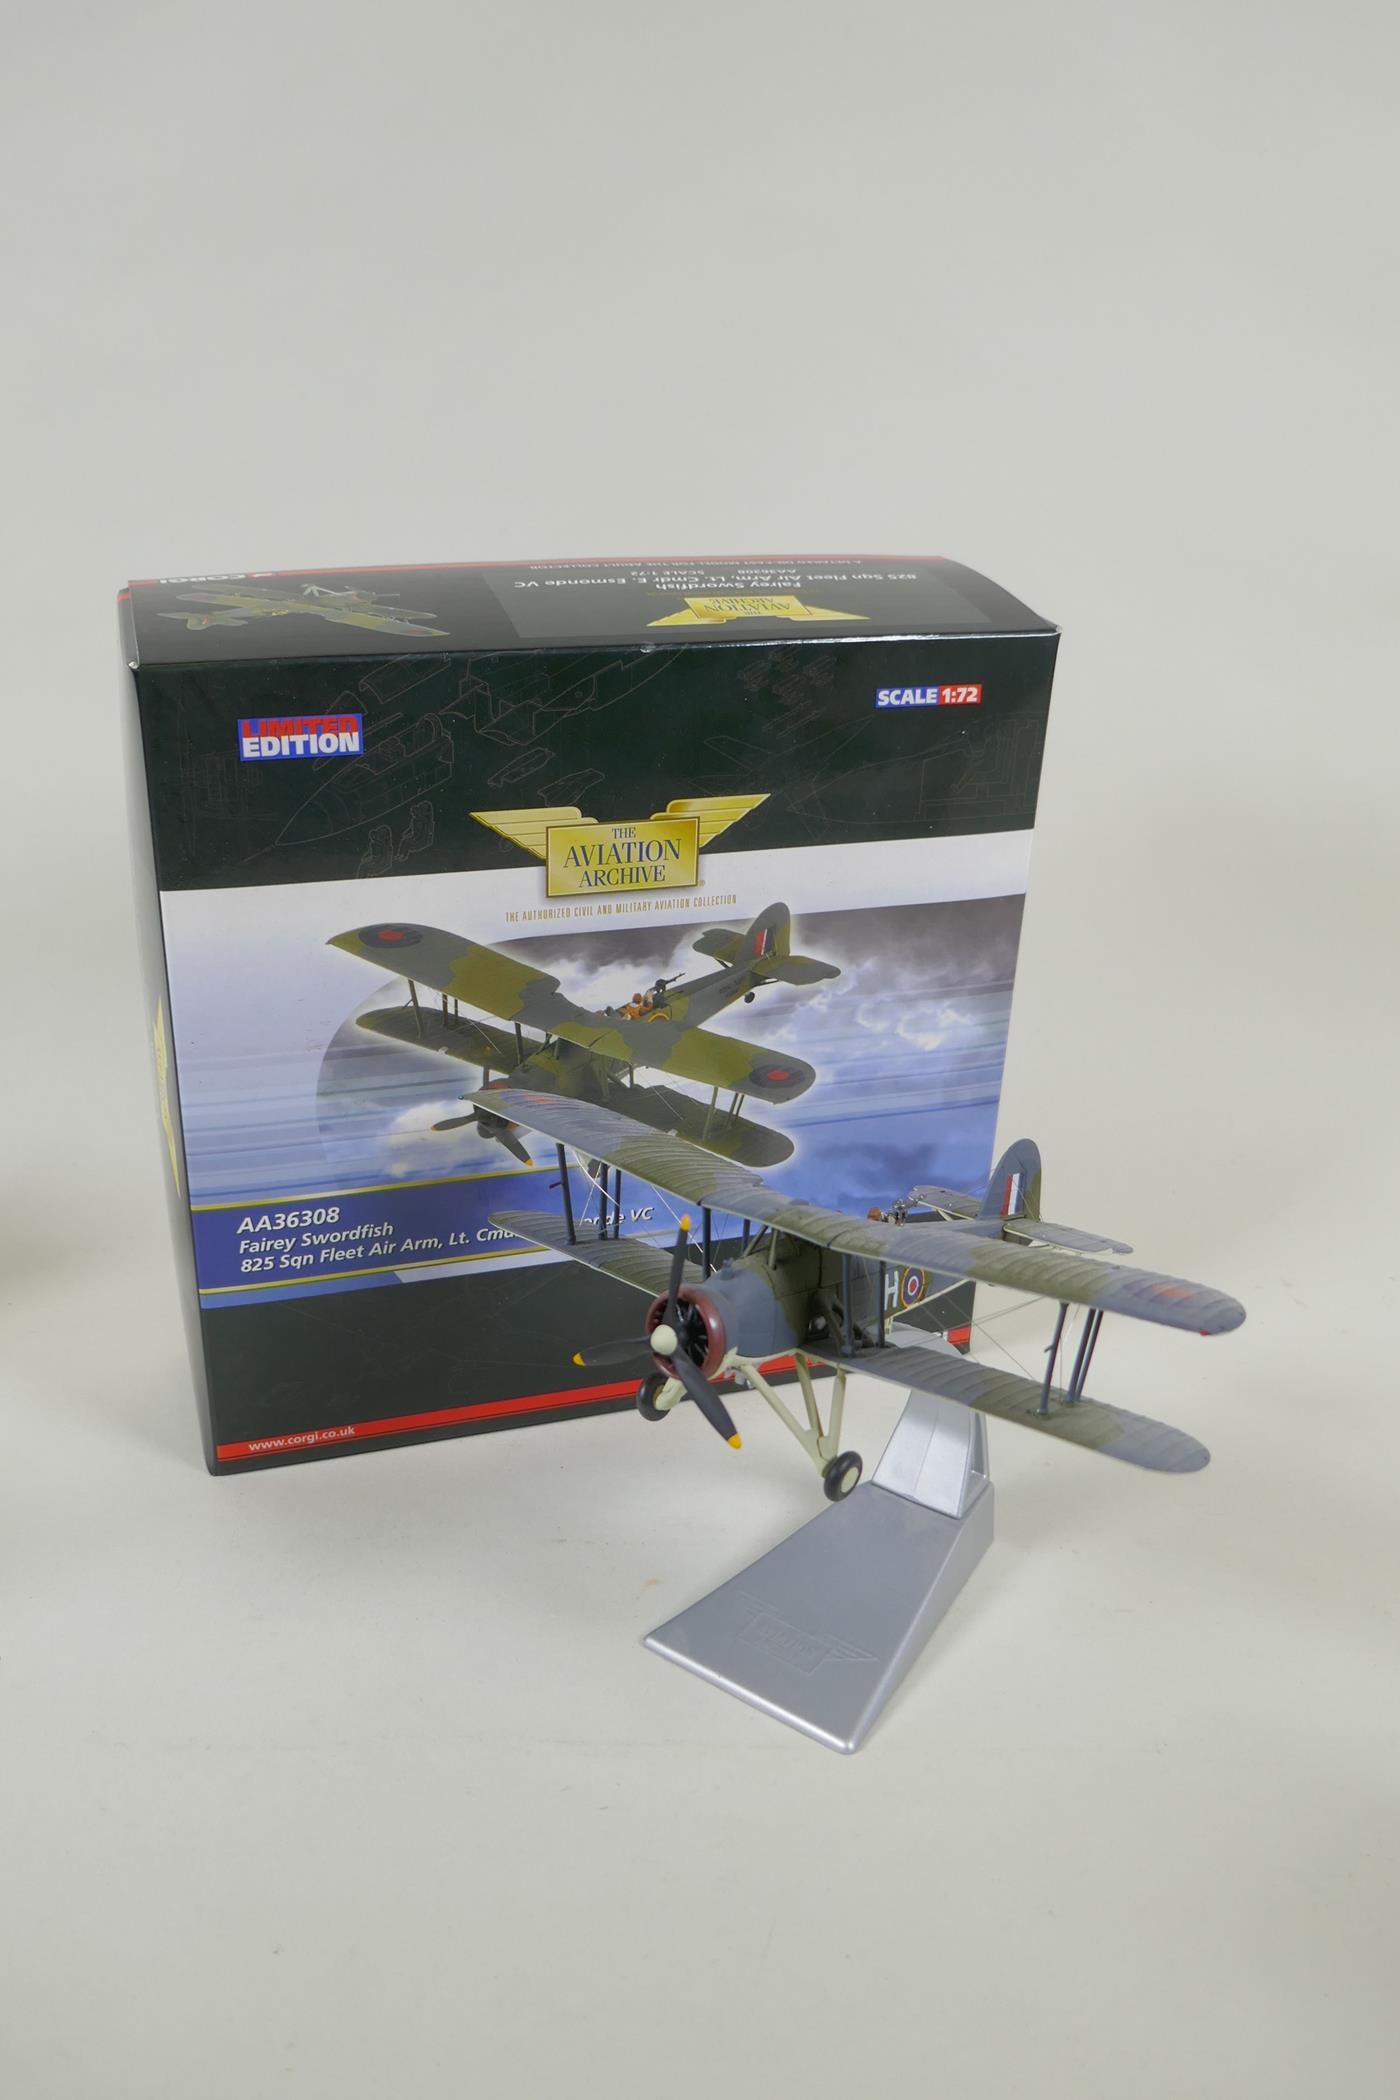 Four Corgi limited edition Aviation Archive diecast 1:72 scale models, including a Hawker Hart, - Image 5 of 6